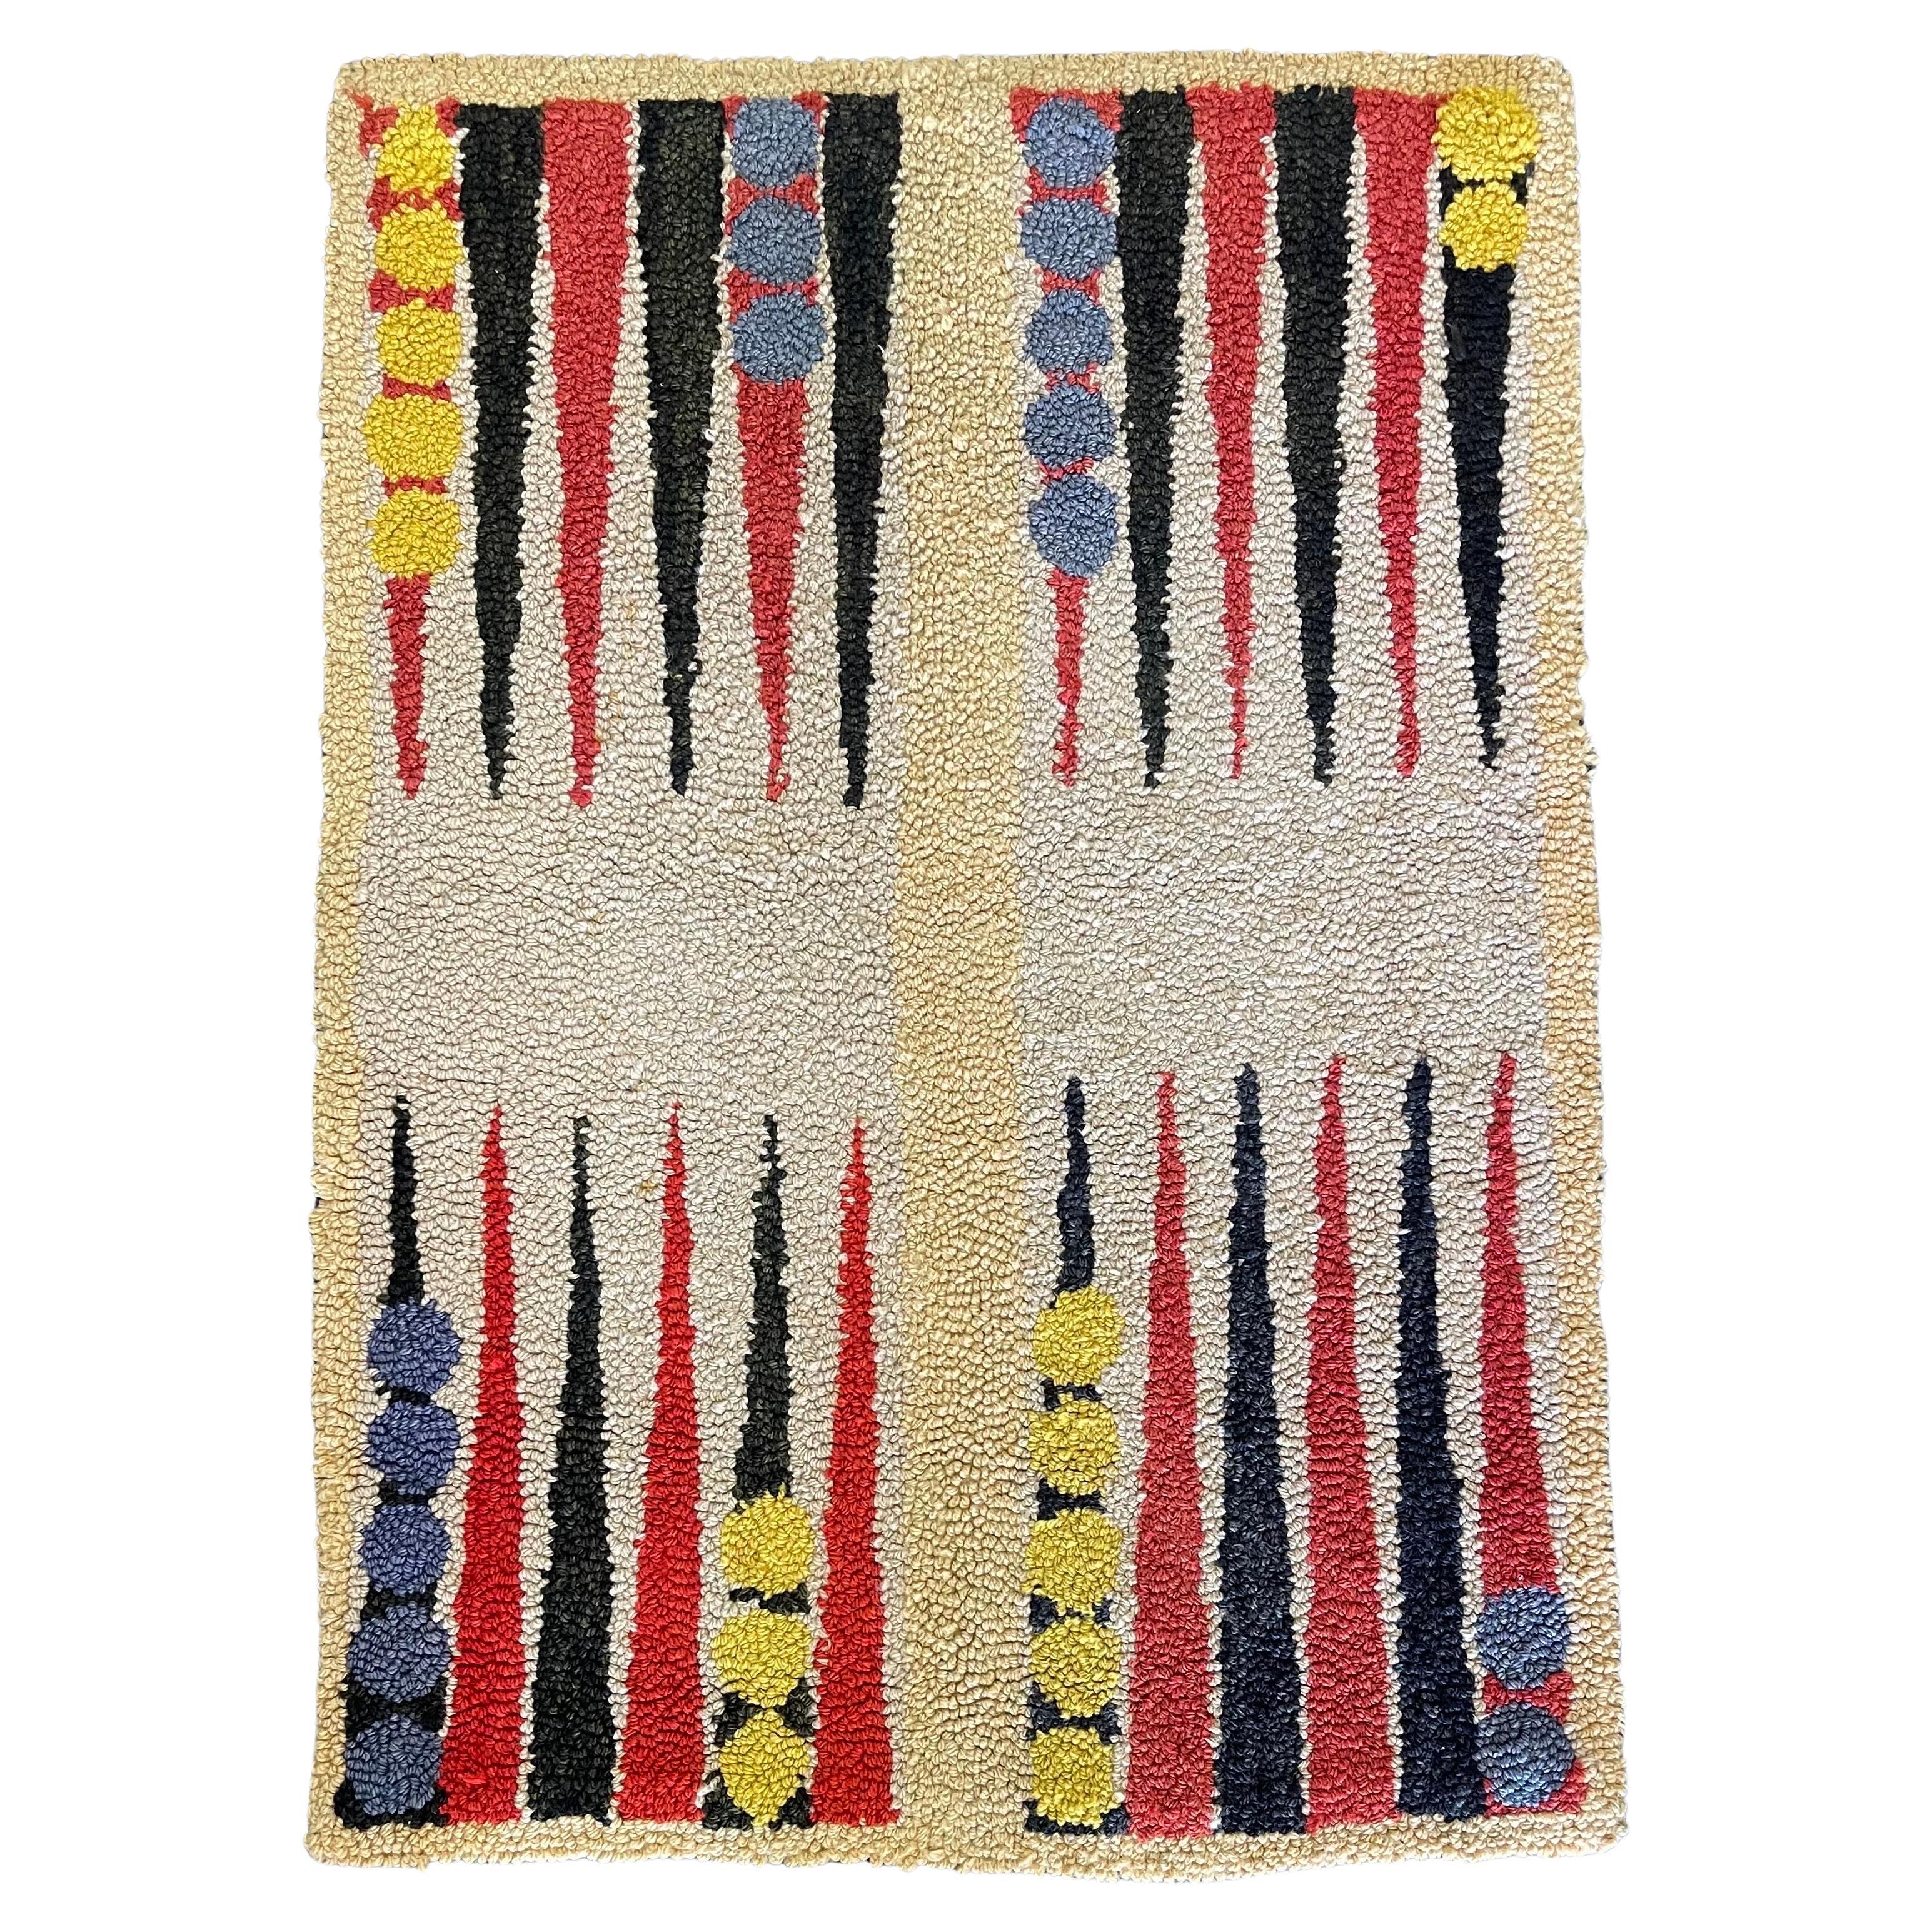 What are hand-woven rugs called?